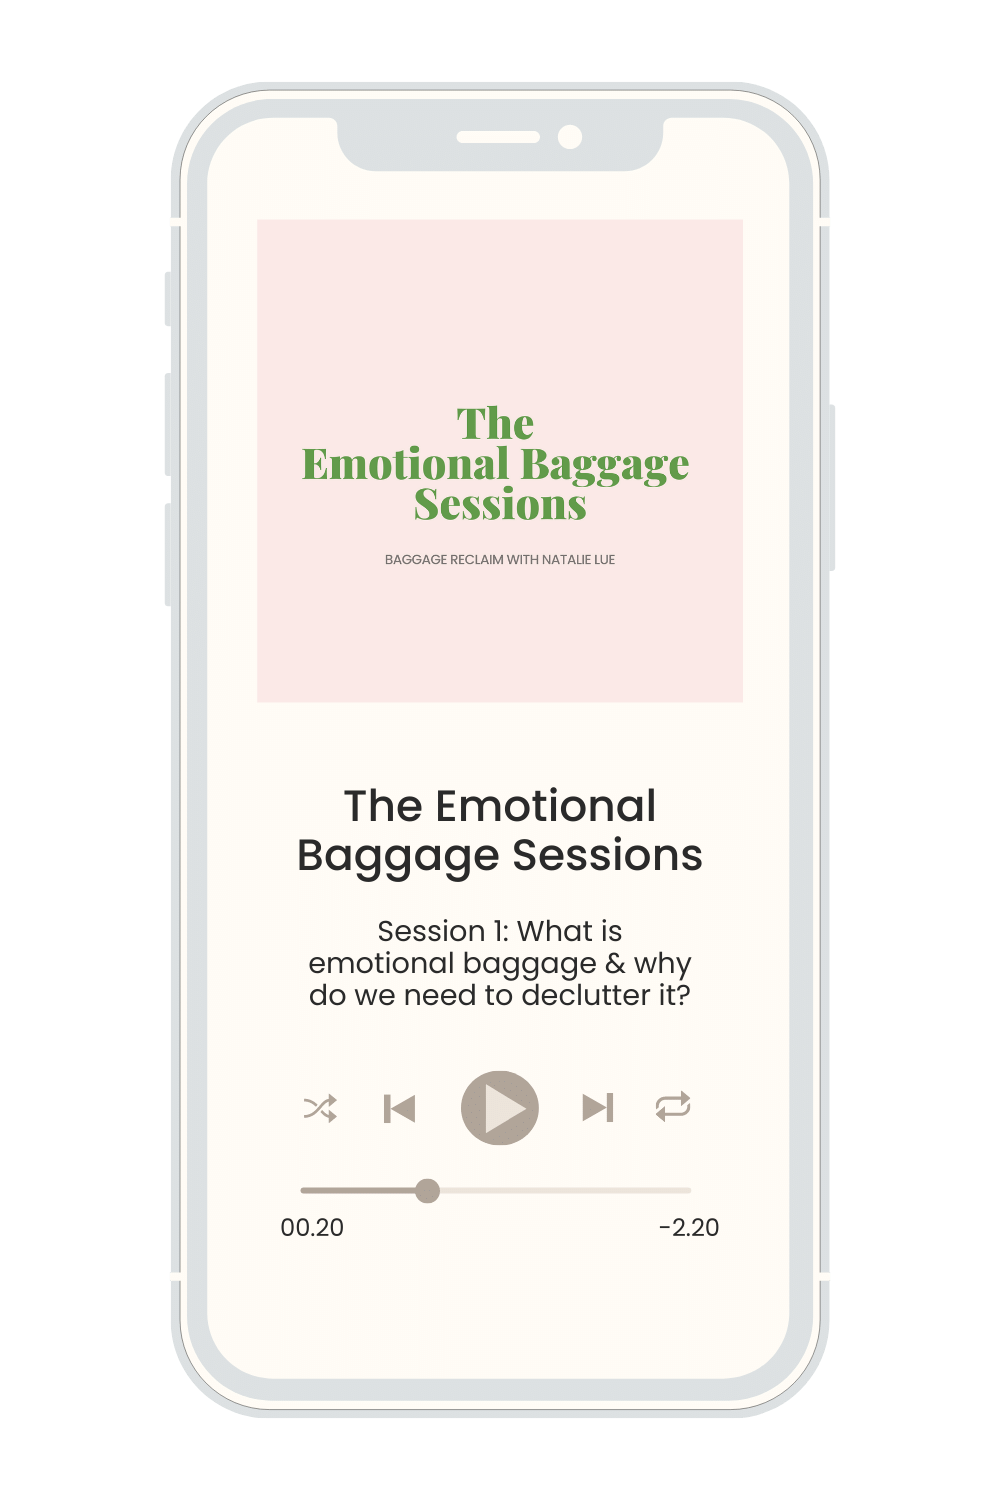 Get The FREE Emotional Baggage Sessions From Natalie Lue Author of Baggage Reclaim